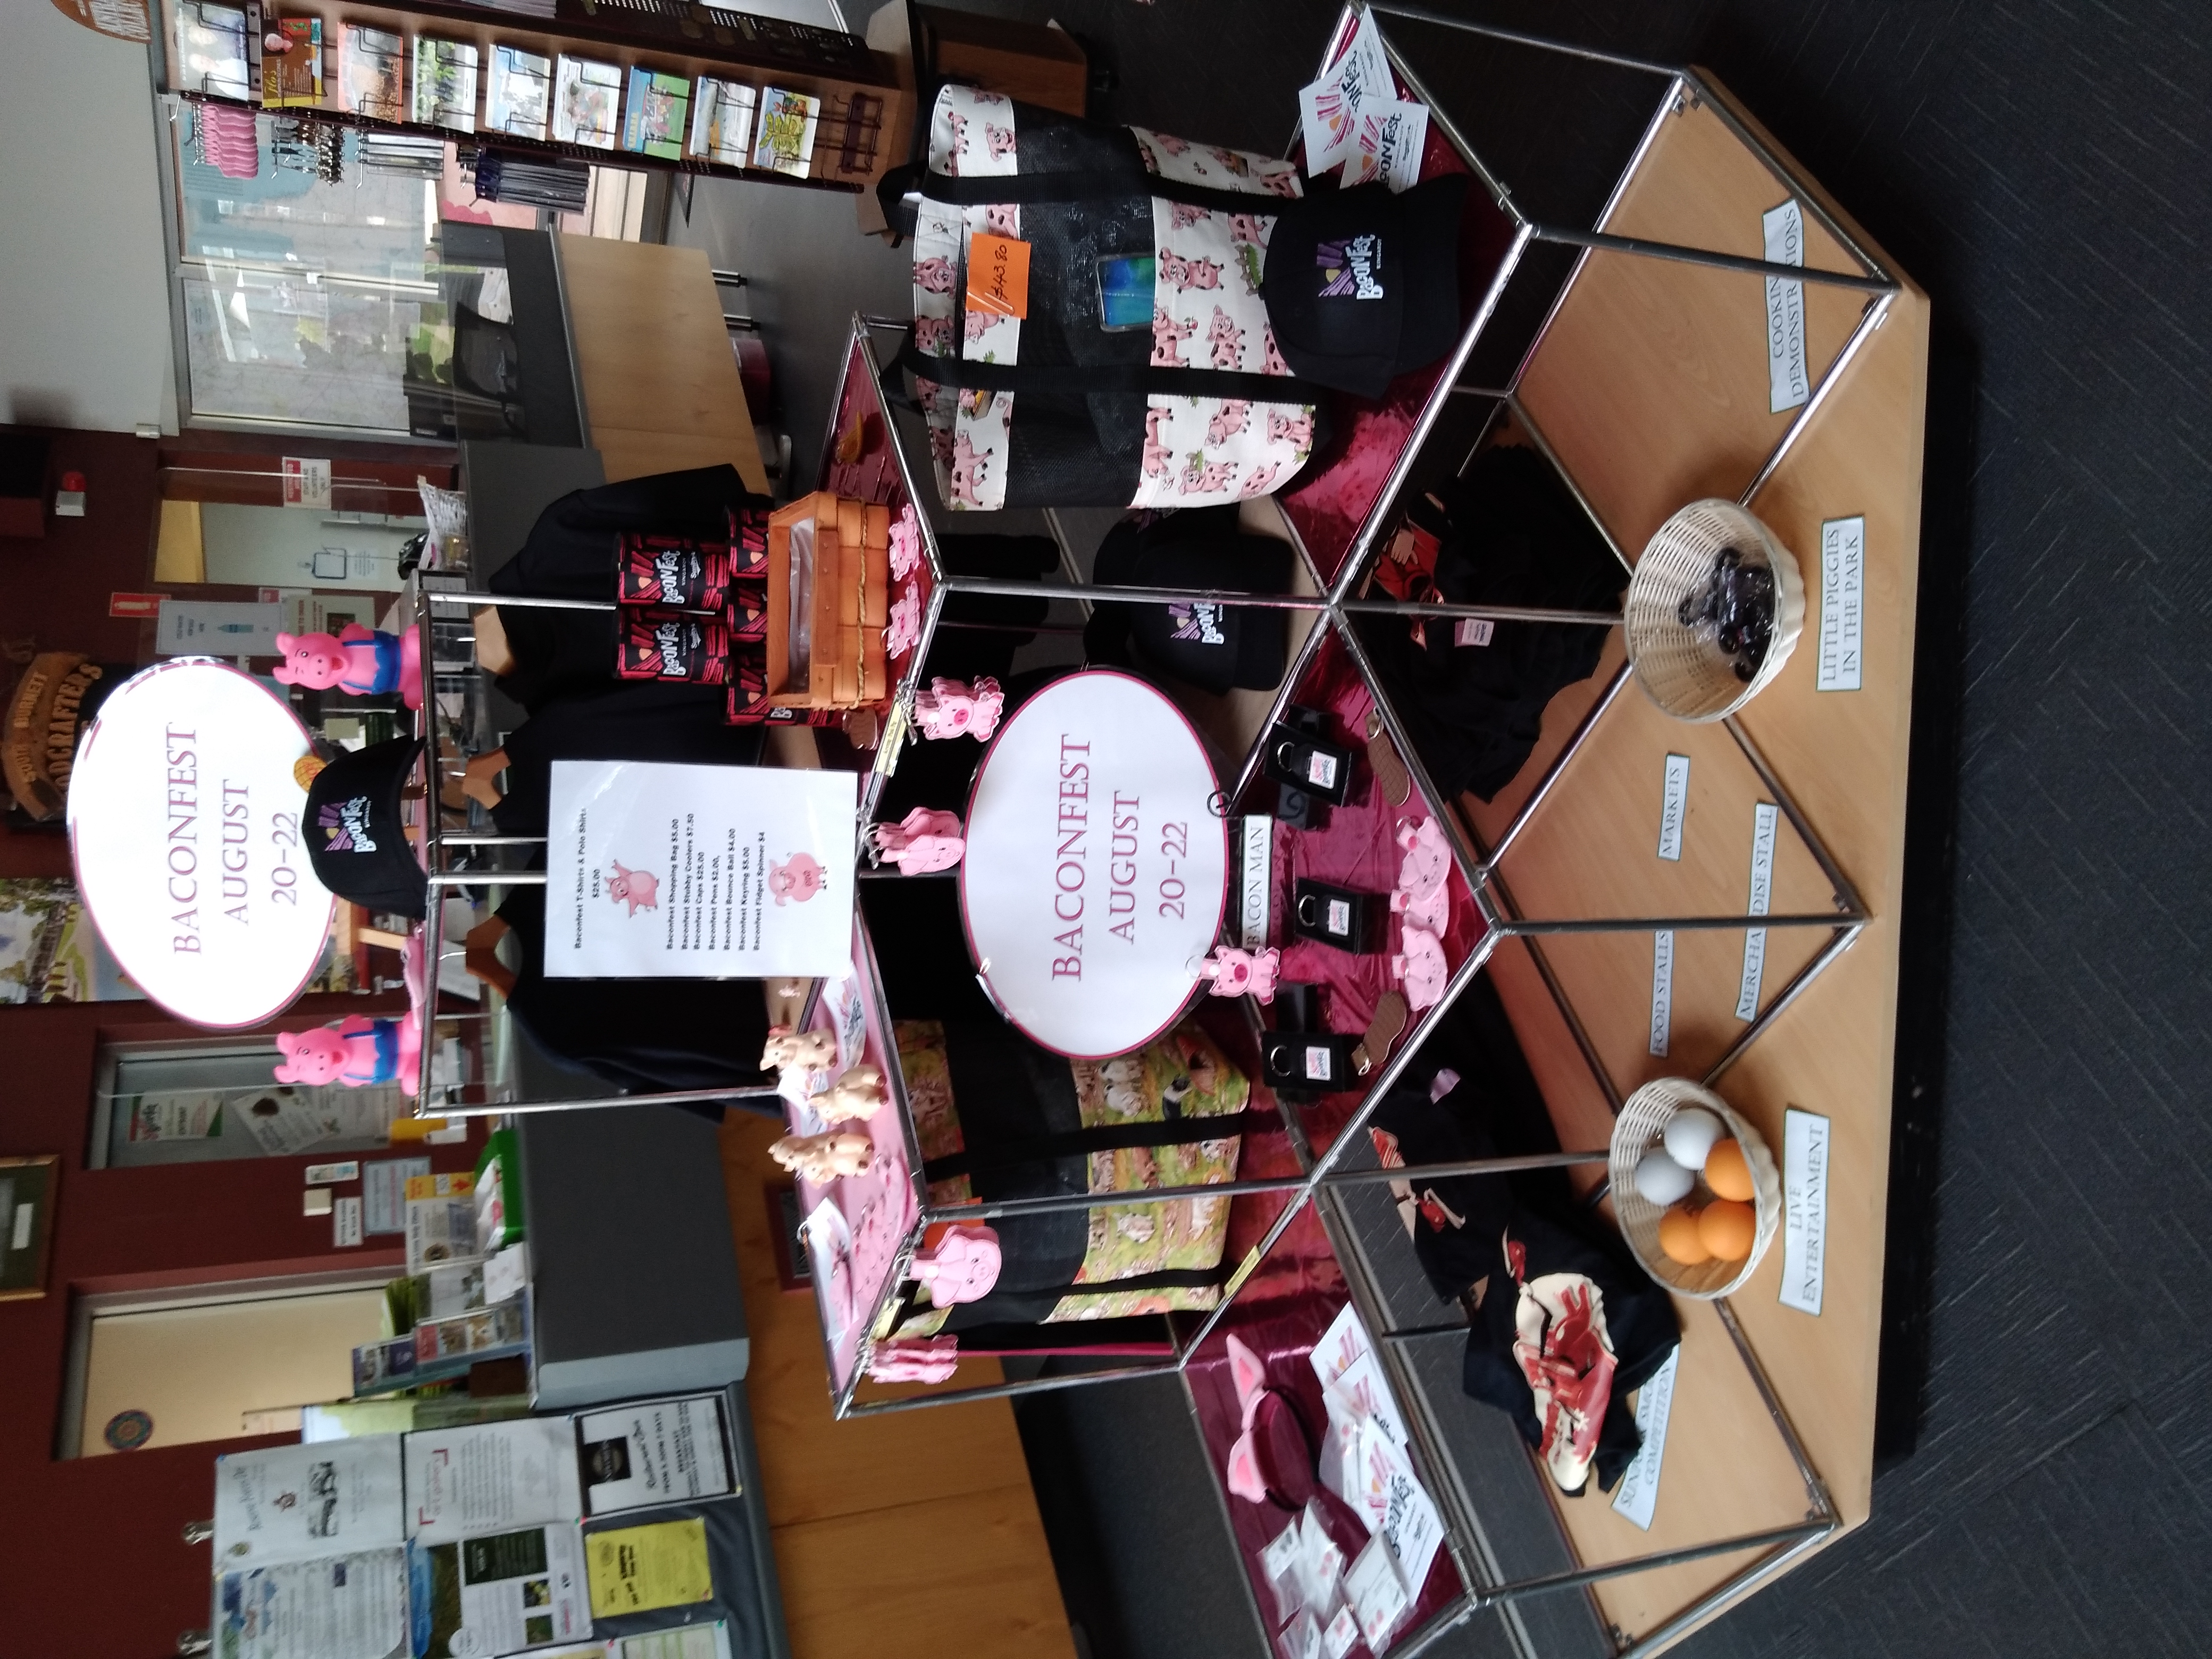 Image: BaconFest merchandise display stand at the Kingaroy Visitor Information Centre